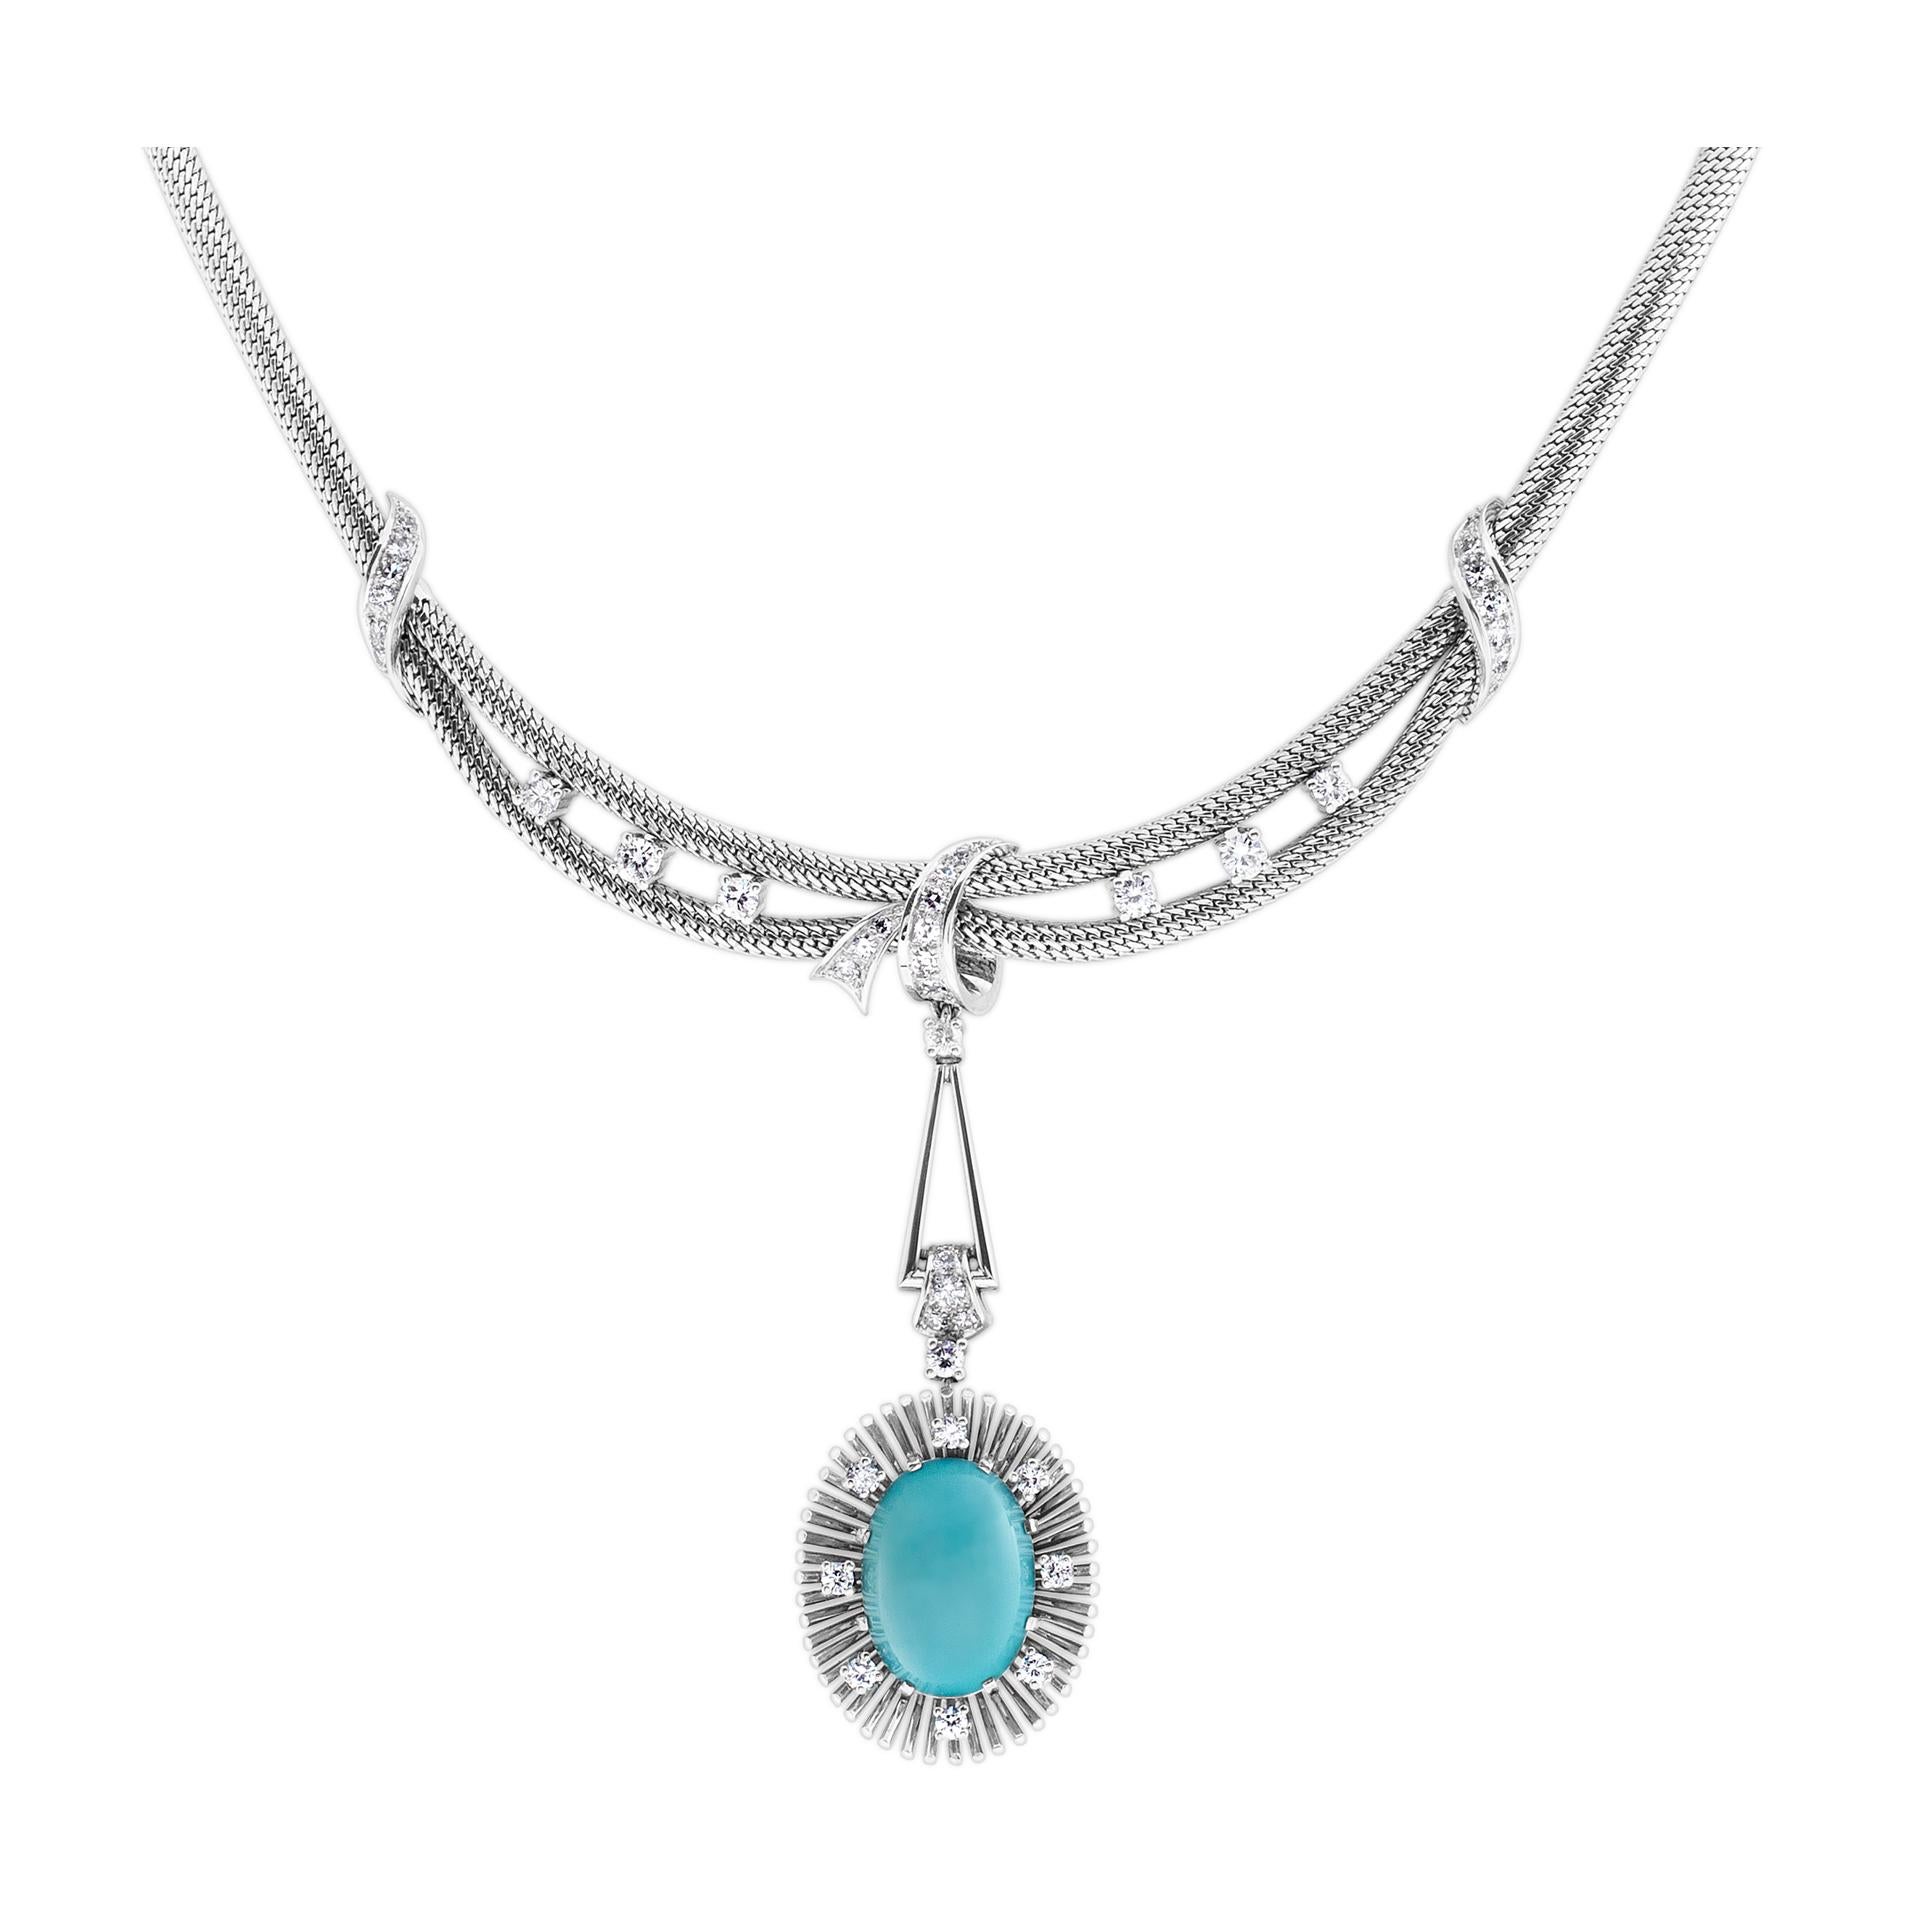 ESTIMATED RETAIL $8500.00 YOUR PRICE $5280.00  Elegant turquoise and diamond necklace and earrings set in 18k white gold. Approximately over 2 carats full cut round brilliant diamonds. Diamonds estimate G-H color, VS-SI clarity. Necklace length 16